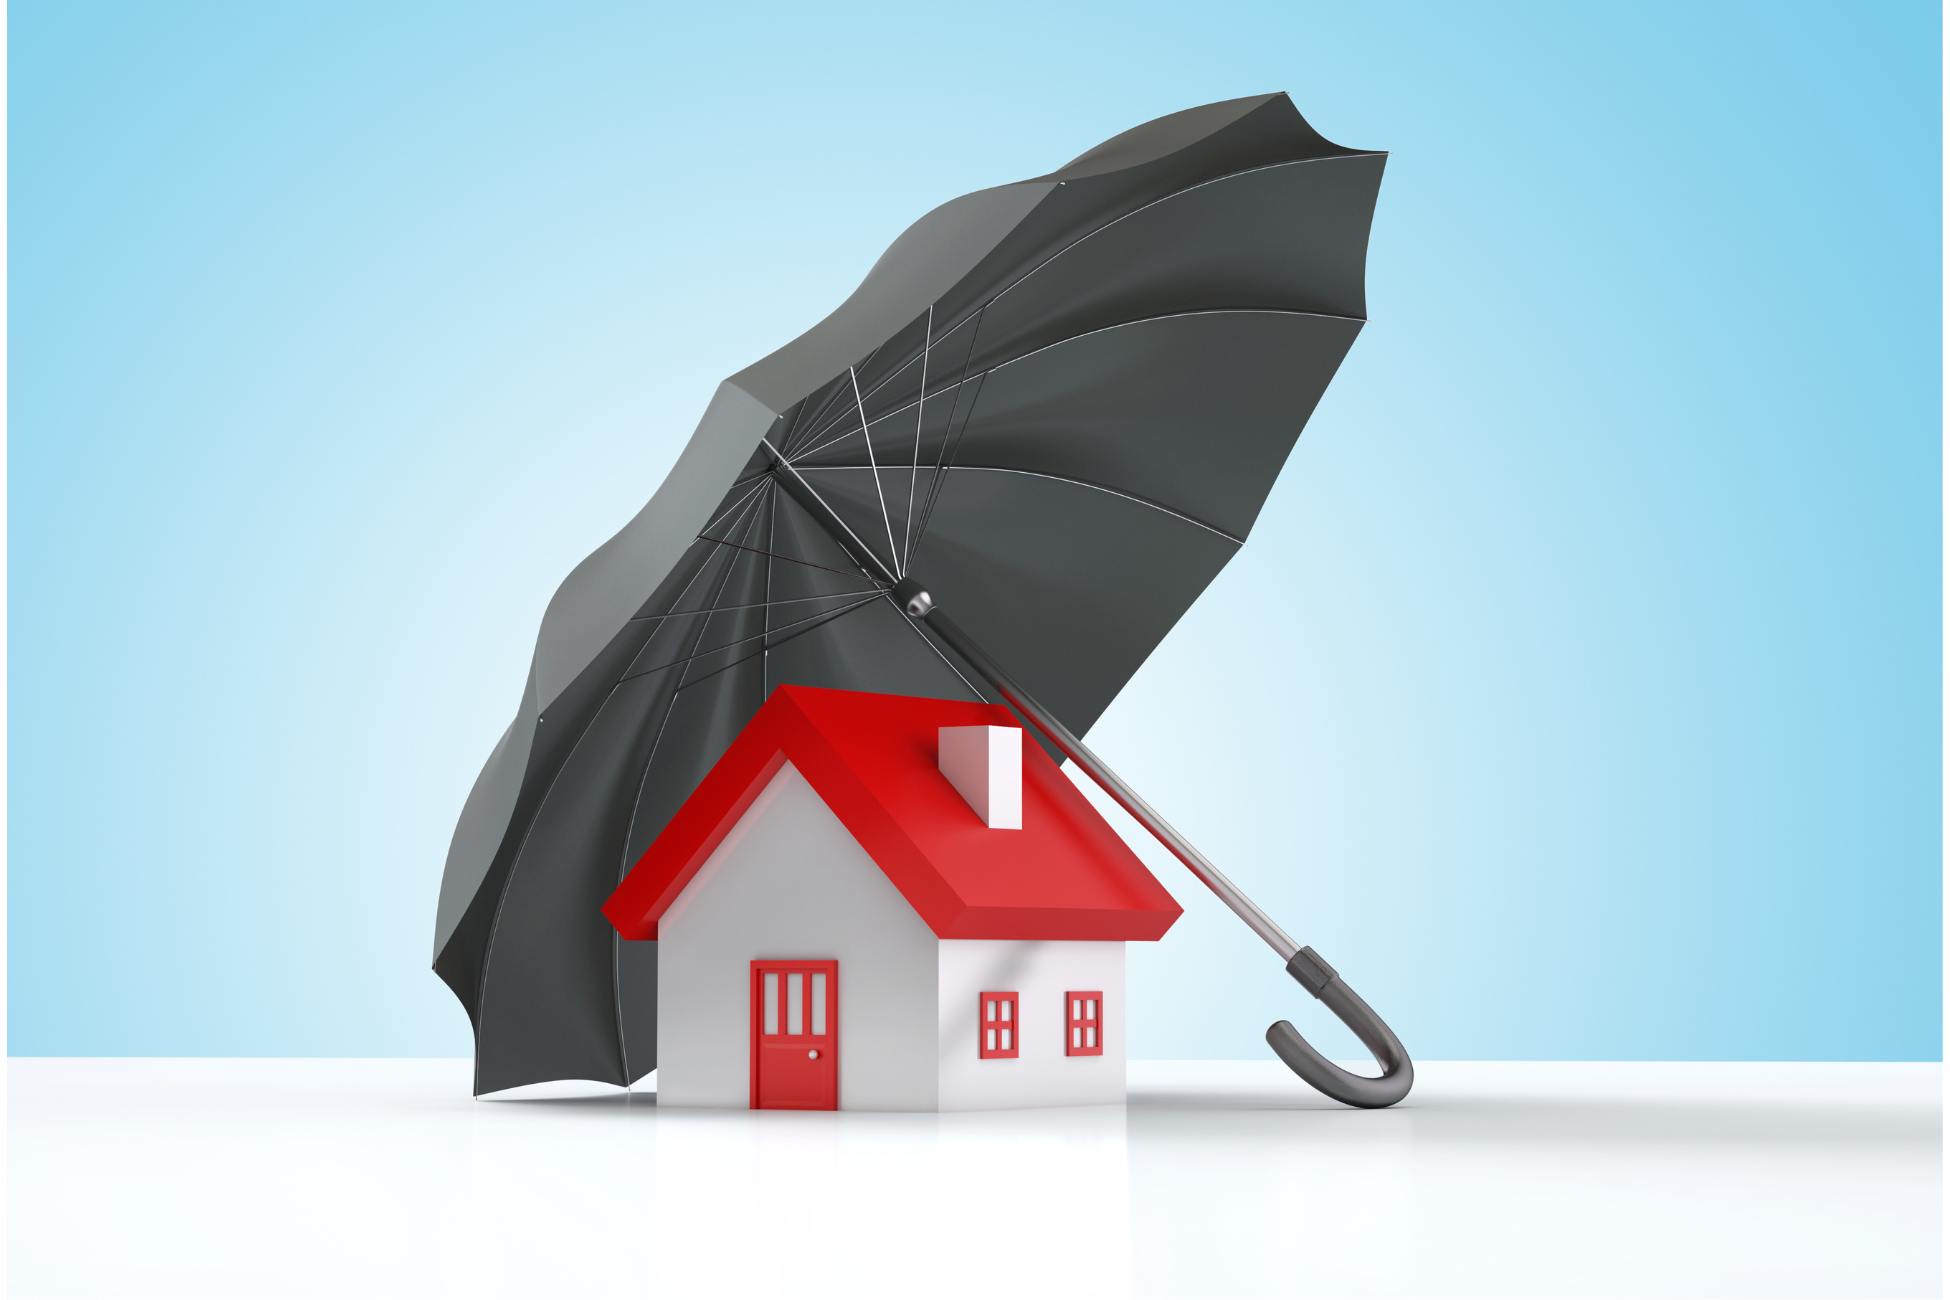 house under an umbrella representing insurance coverage and protection